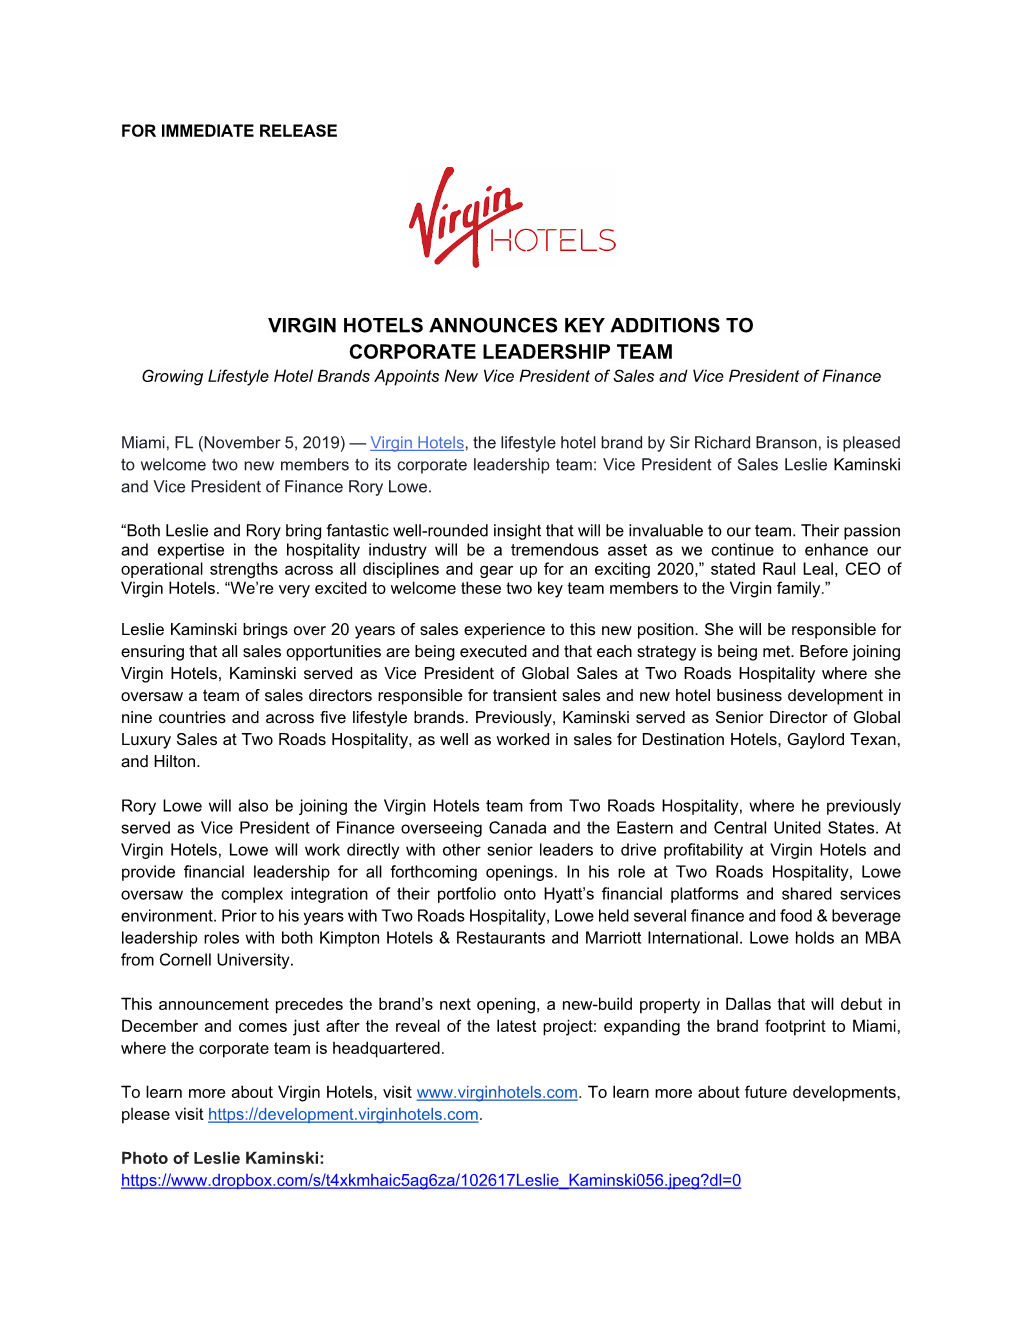 VIRGIN HOTELS ANNOUNCES KEY ADDITIONS to CORPORATE LEADERSHIP TEAM Growing Lifestyle Hotel Brands Appoints New Vice President of Sales and Vice President of Finance